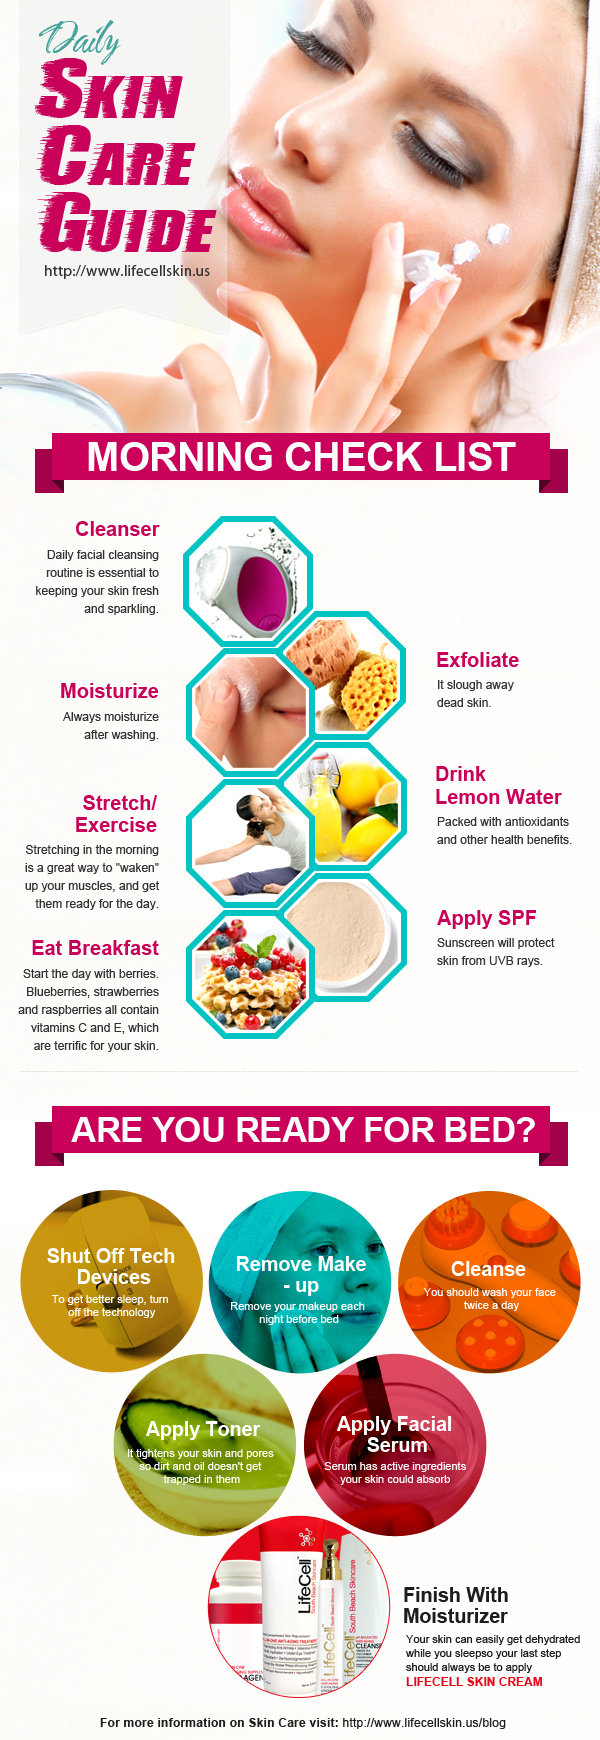 Daily Skin Care Guide By LifeCell \u2013 [Infographic 